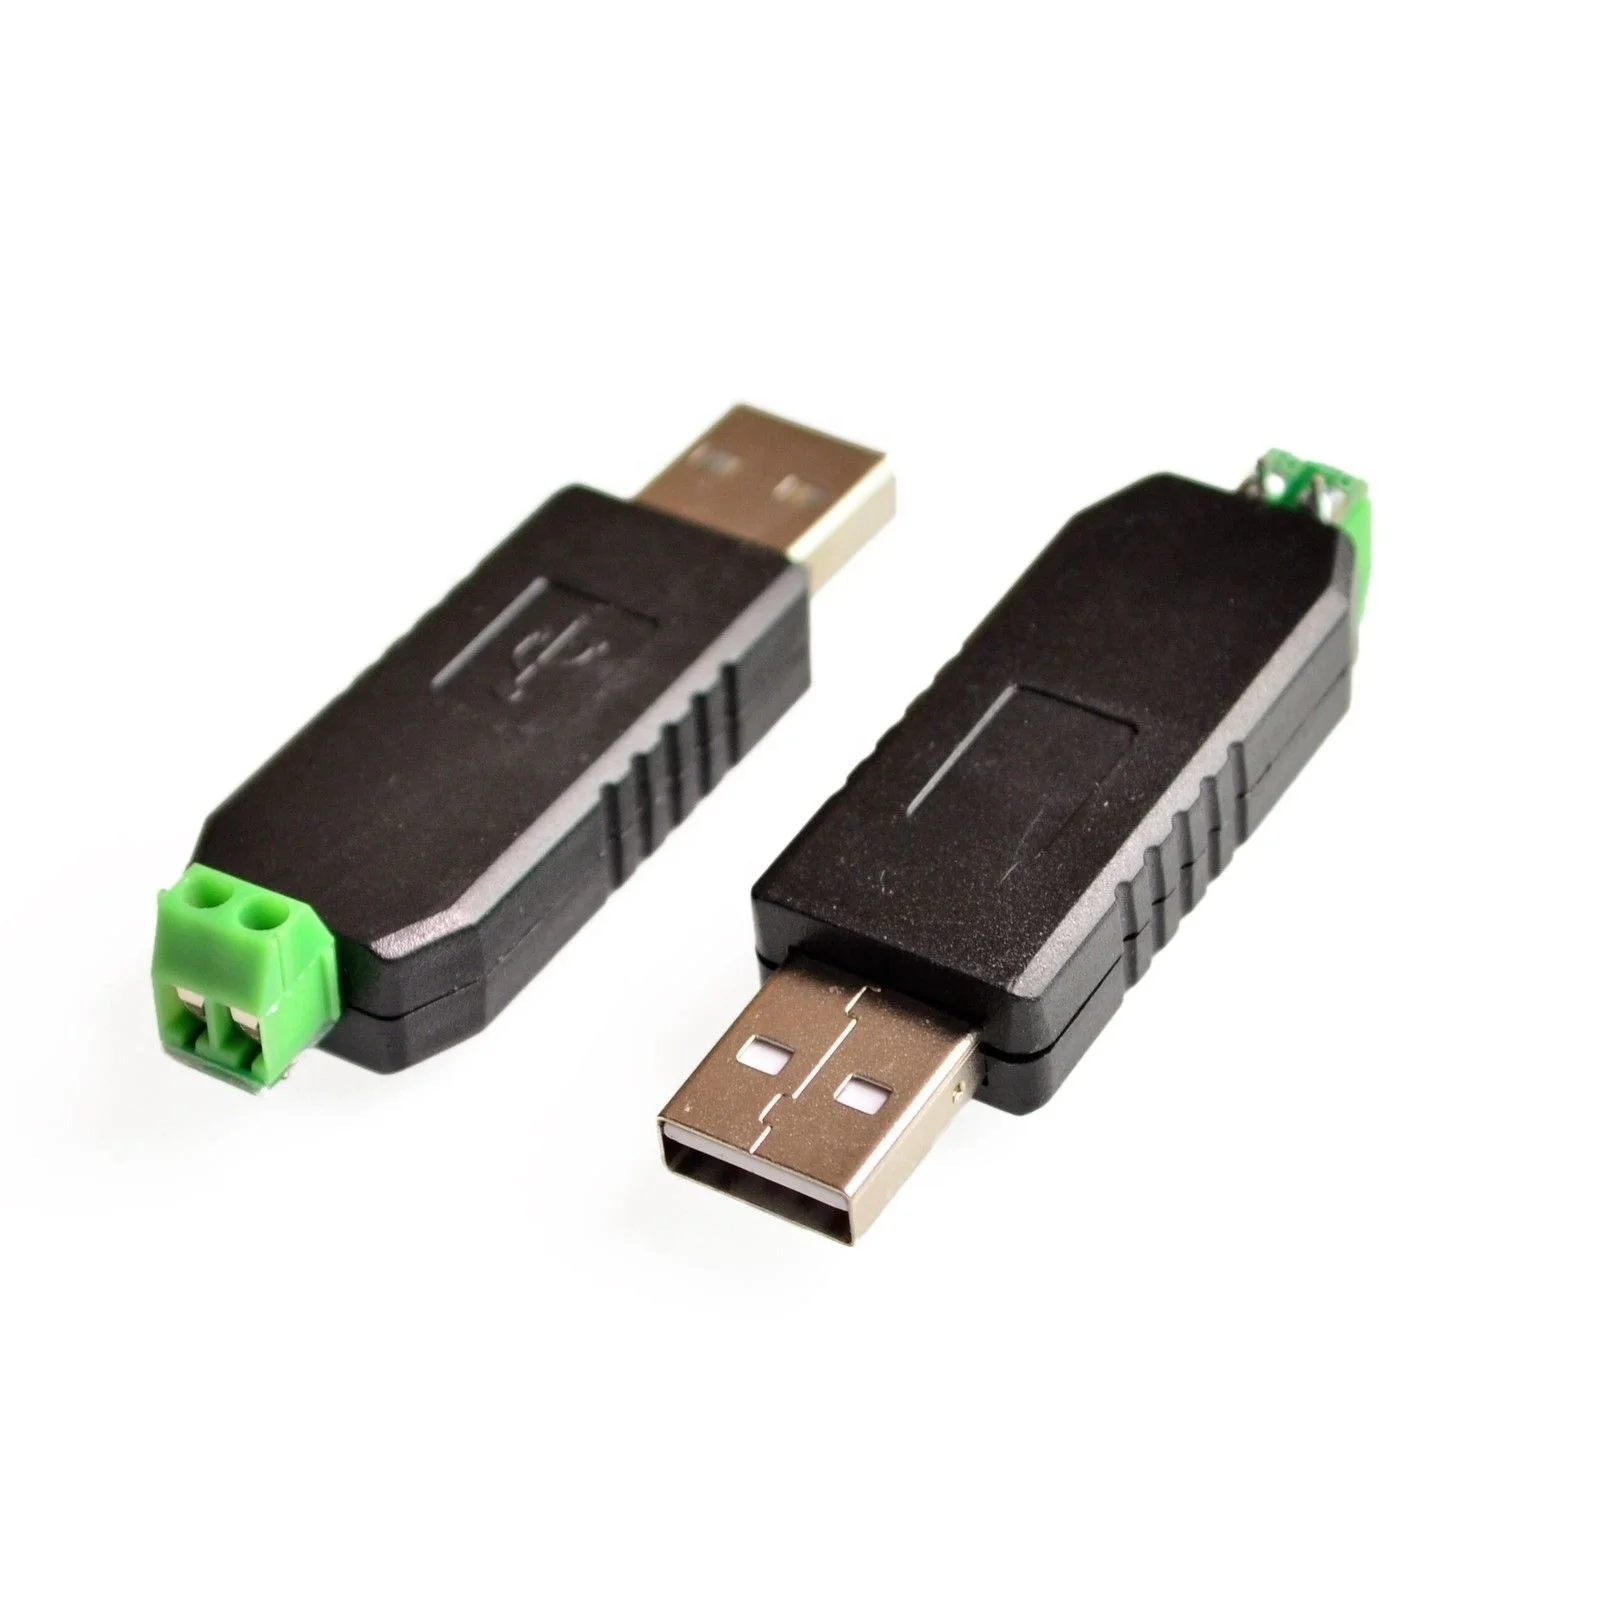 

CH340 USB to RS485 485 Converter Adapter Module For Win7/Linux/XP/Vista